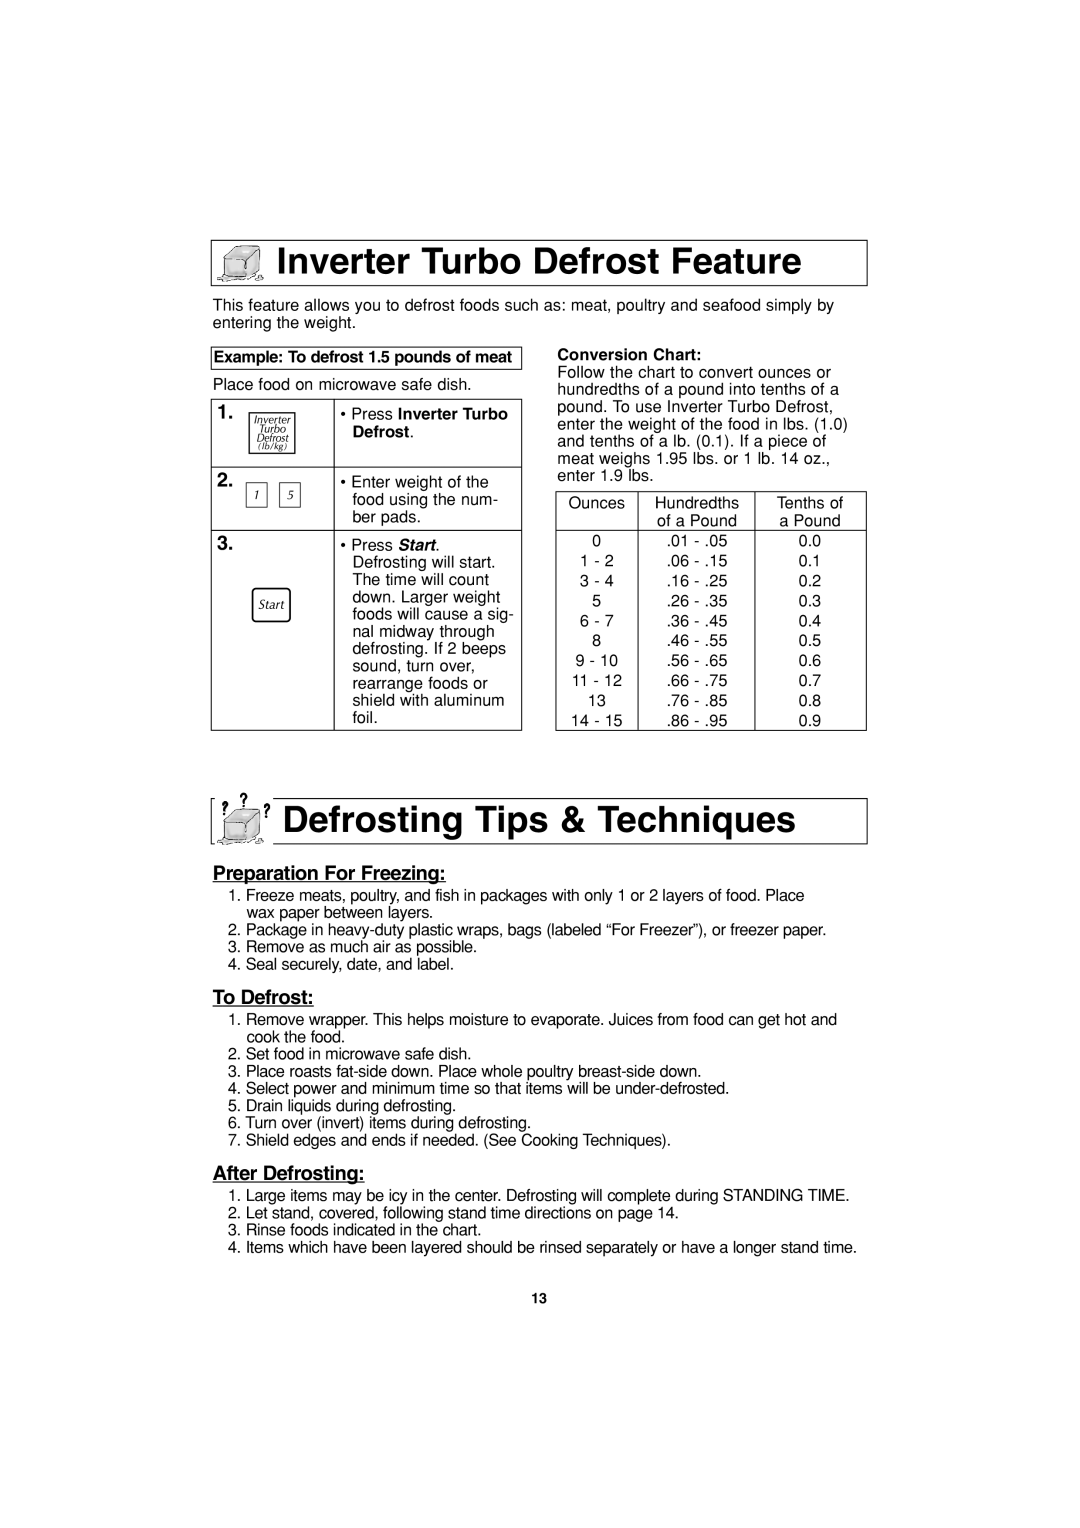 Panasonic NN-S953 Inverter Turbo Defrost Feature, Defrosting Tips & Techniques, Preparation For Freezing, To Defrost 